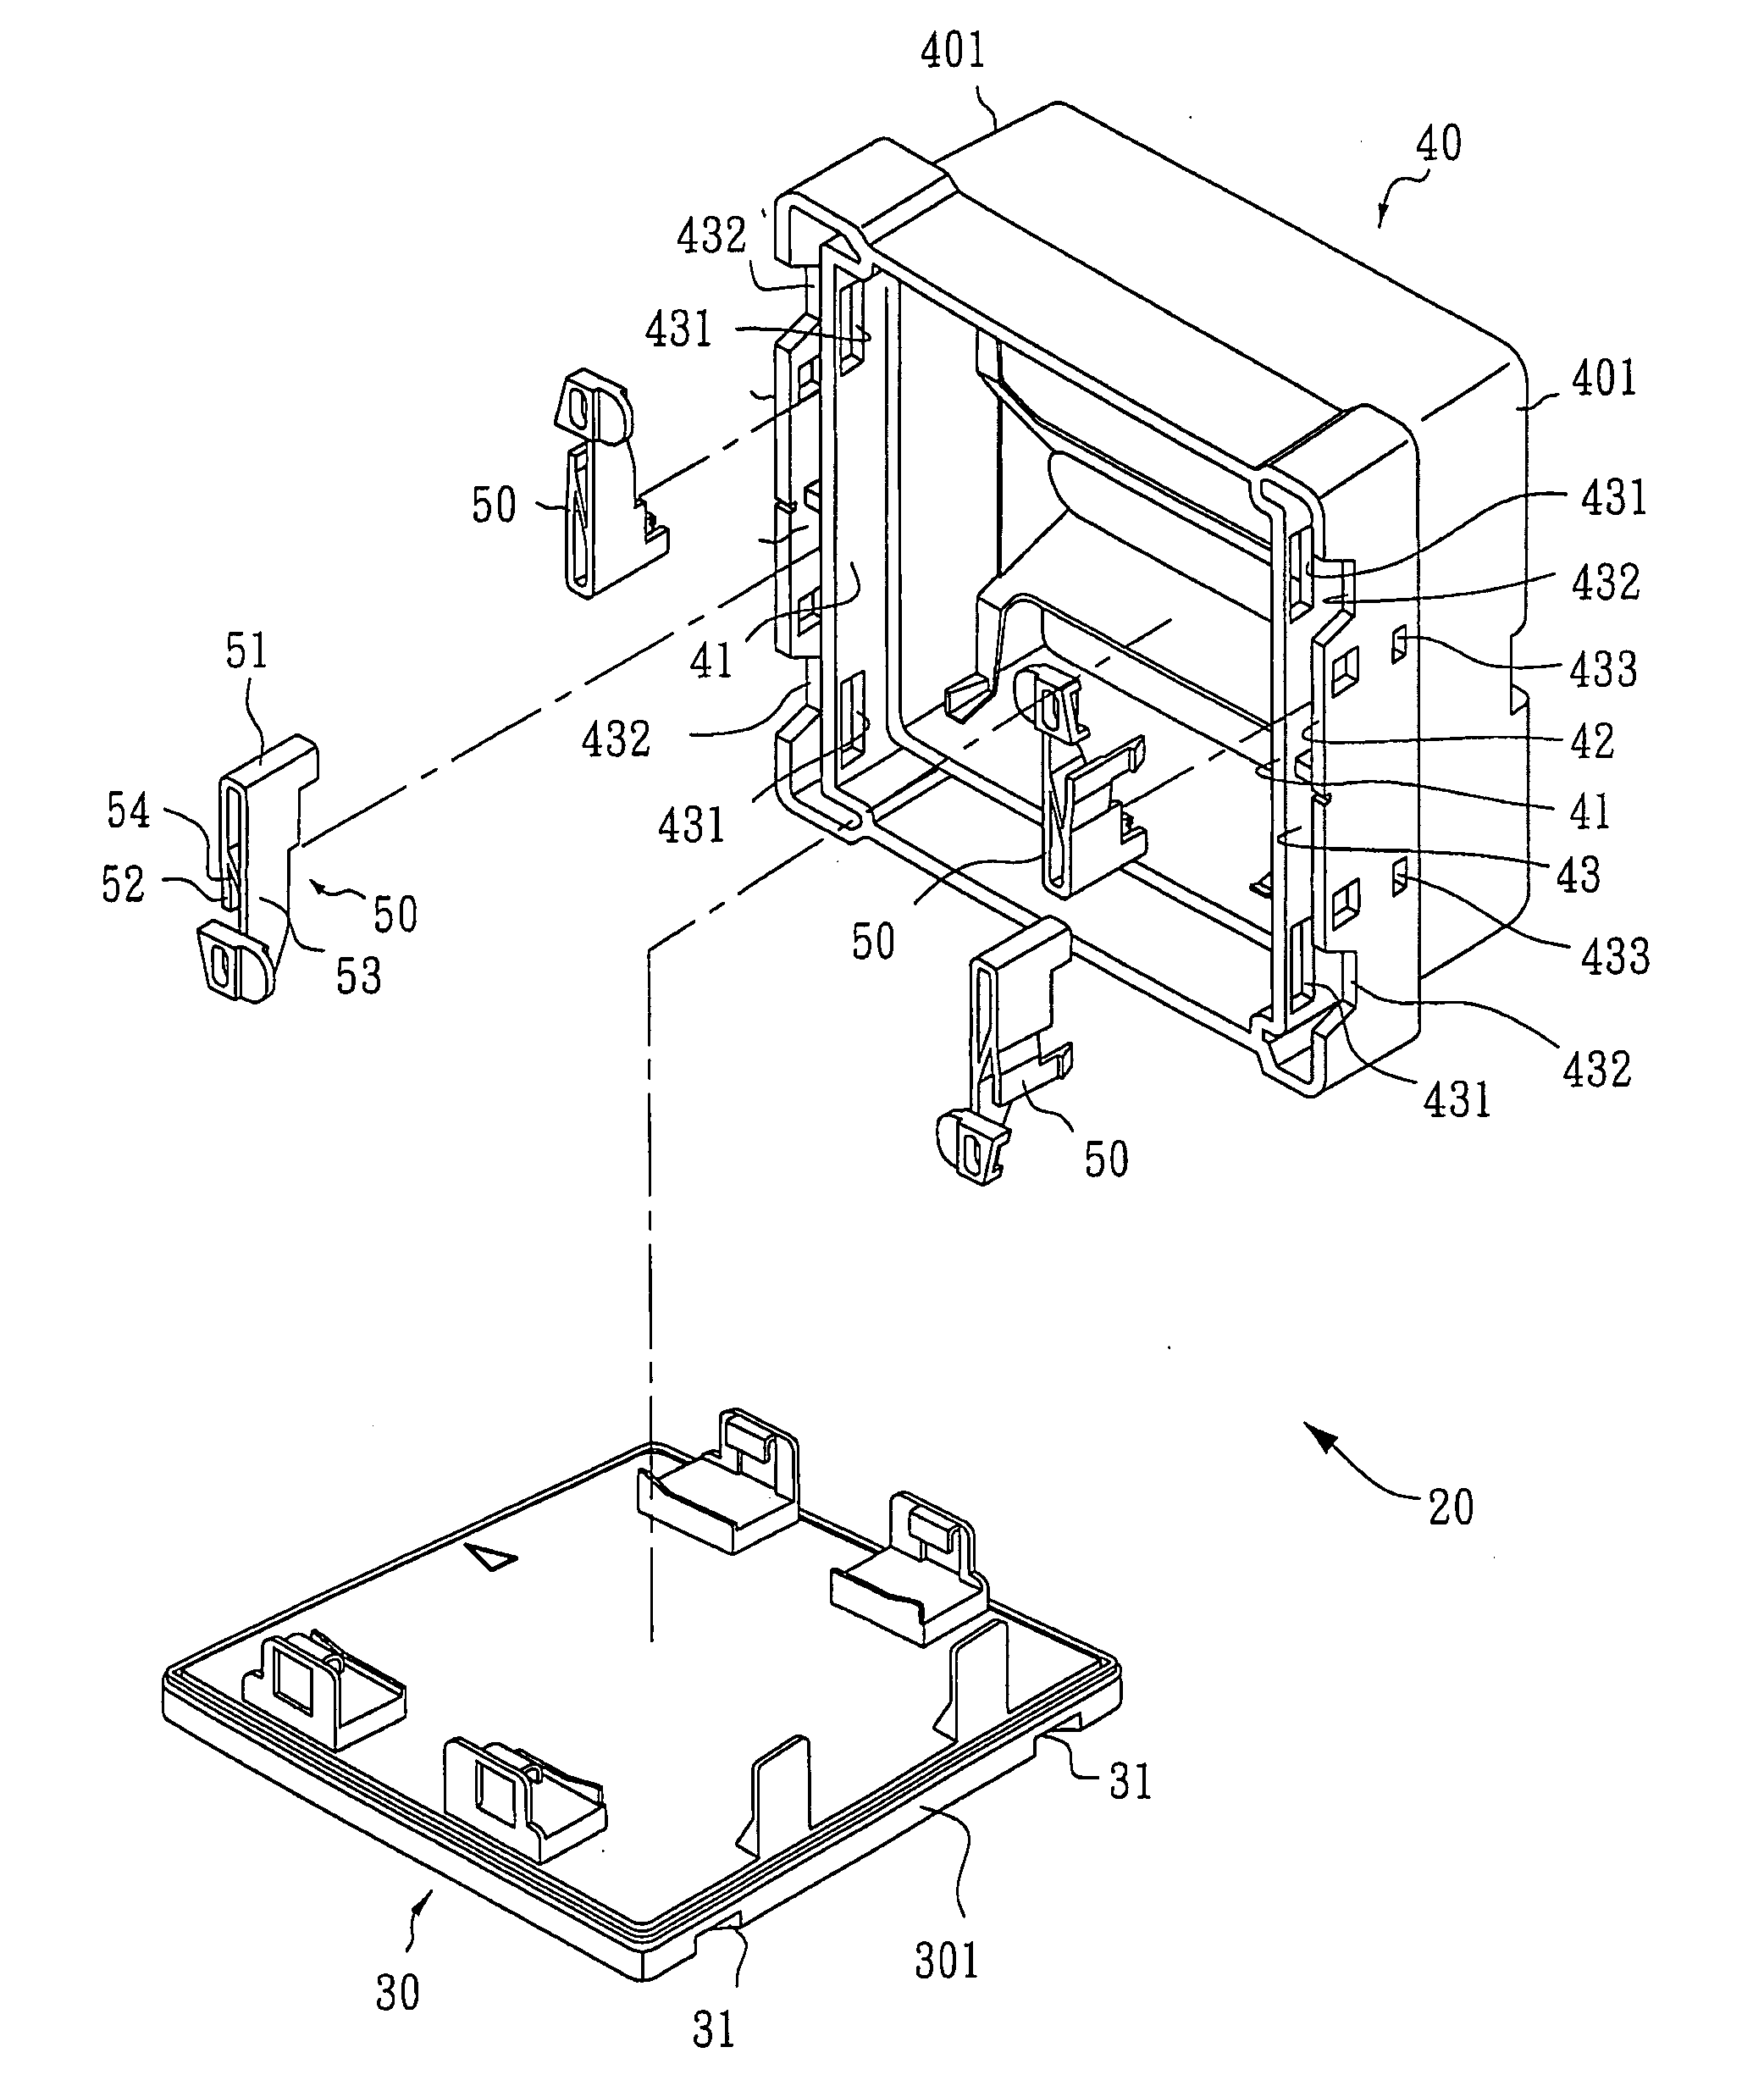 Fastening structure of clean container